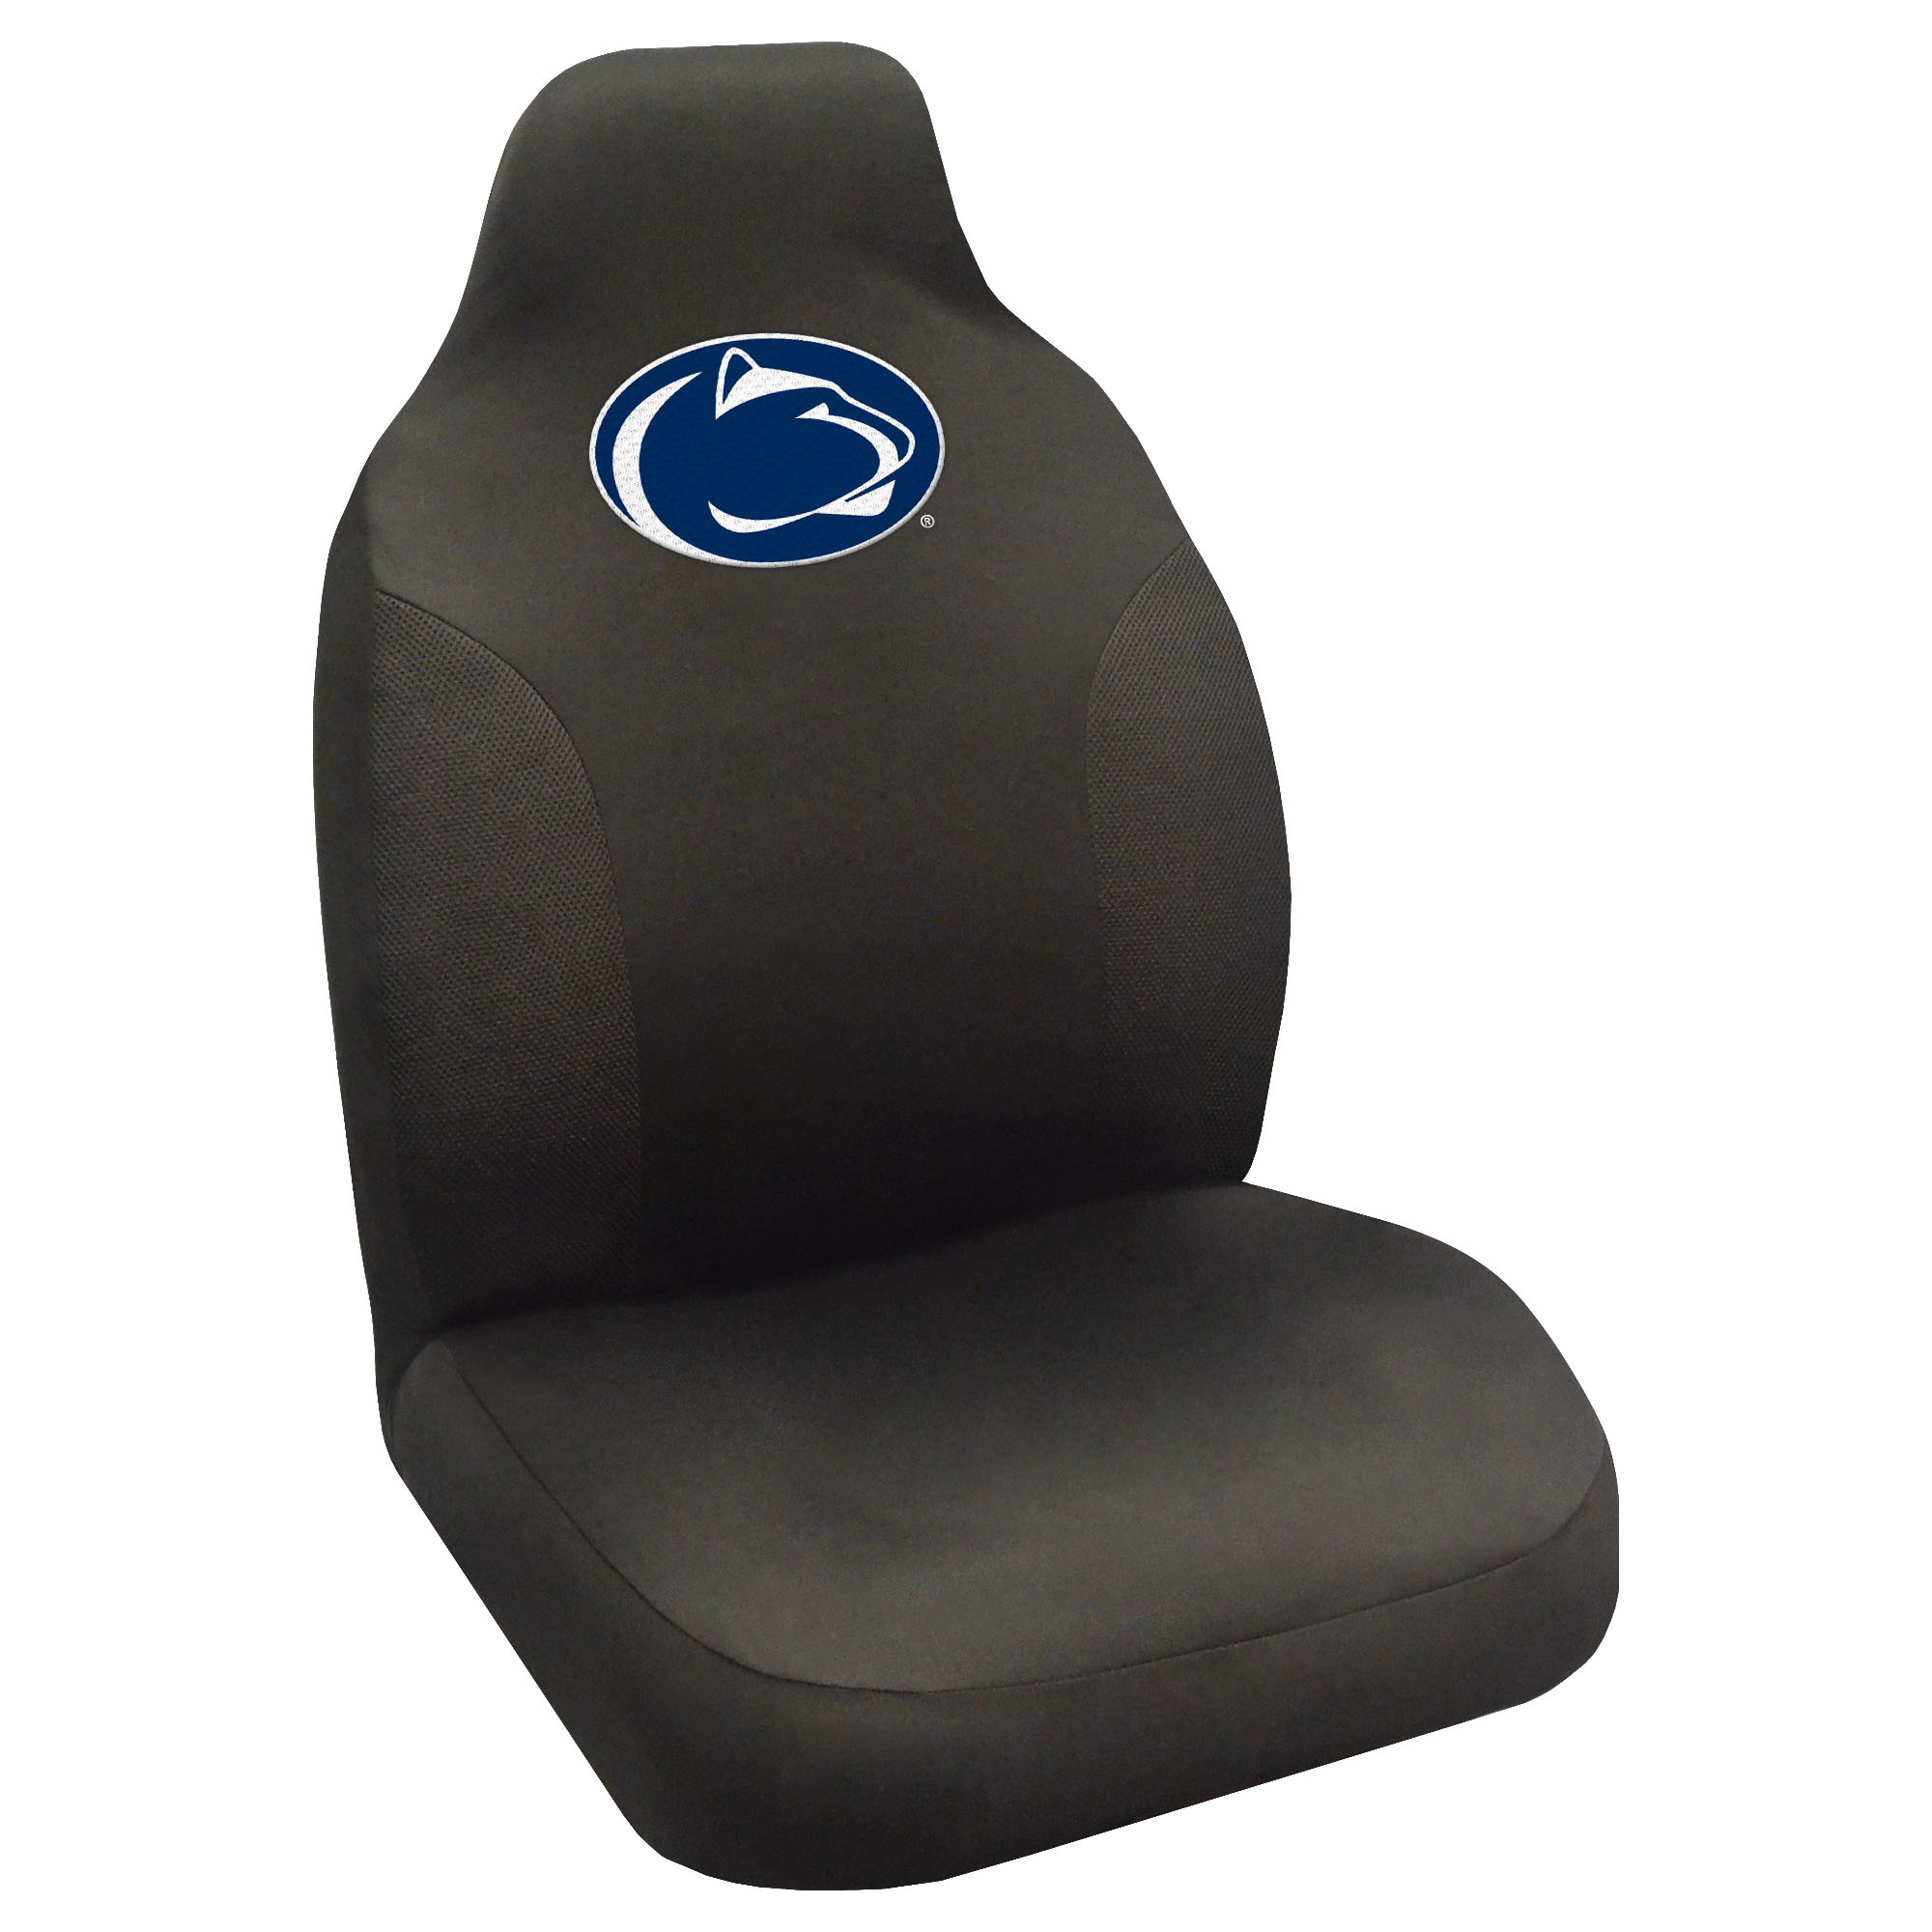 FANMATS Penn State Nittany Lions NCAA Seat Cover(s) for Universal at